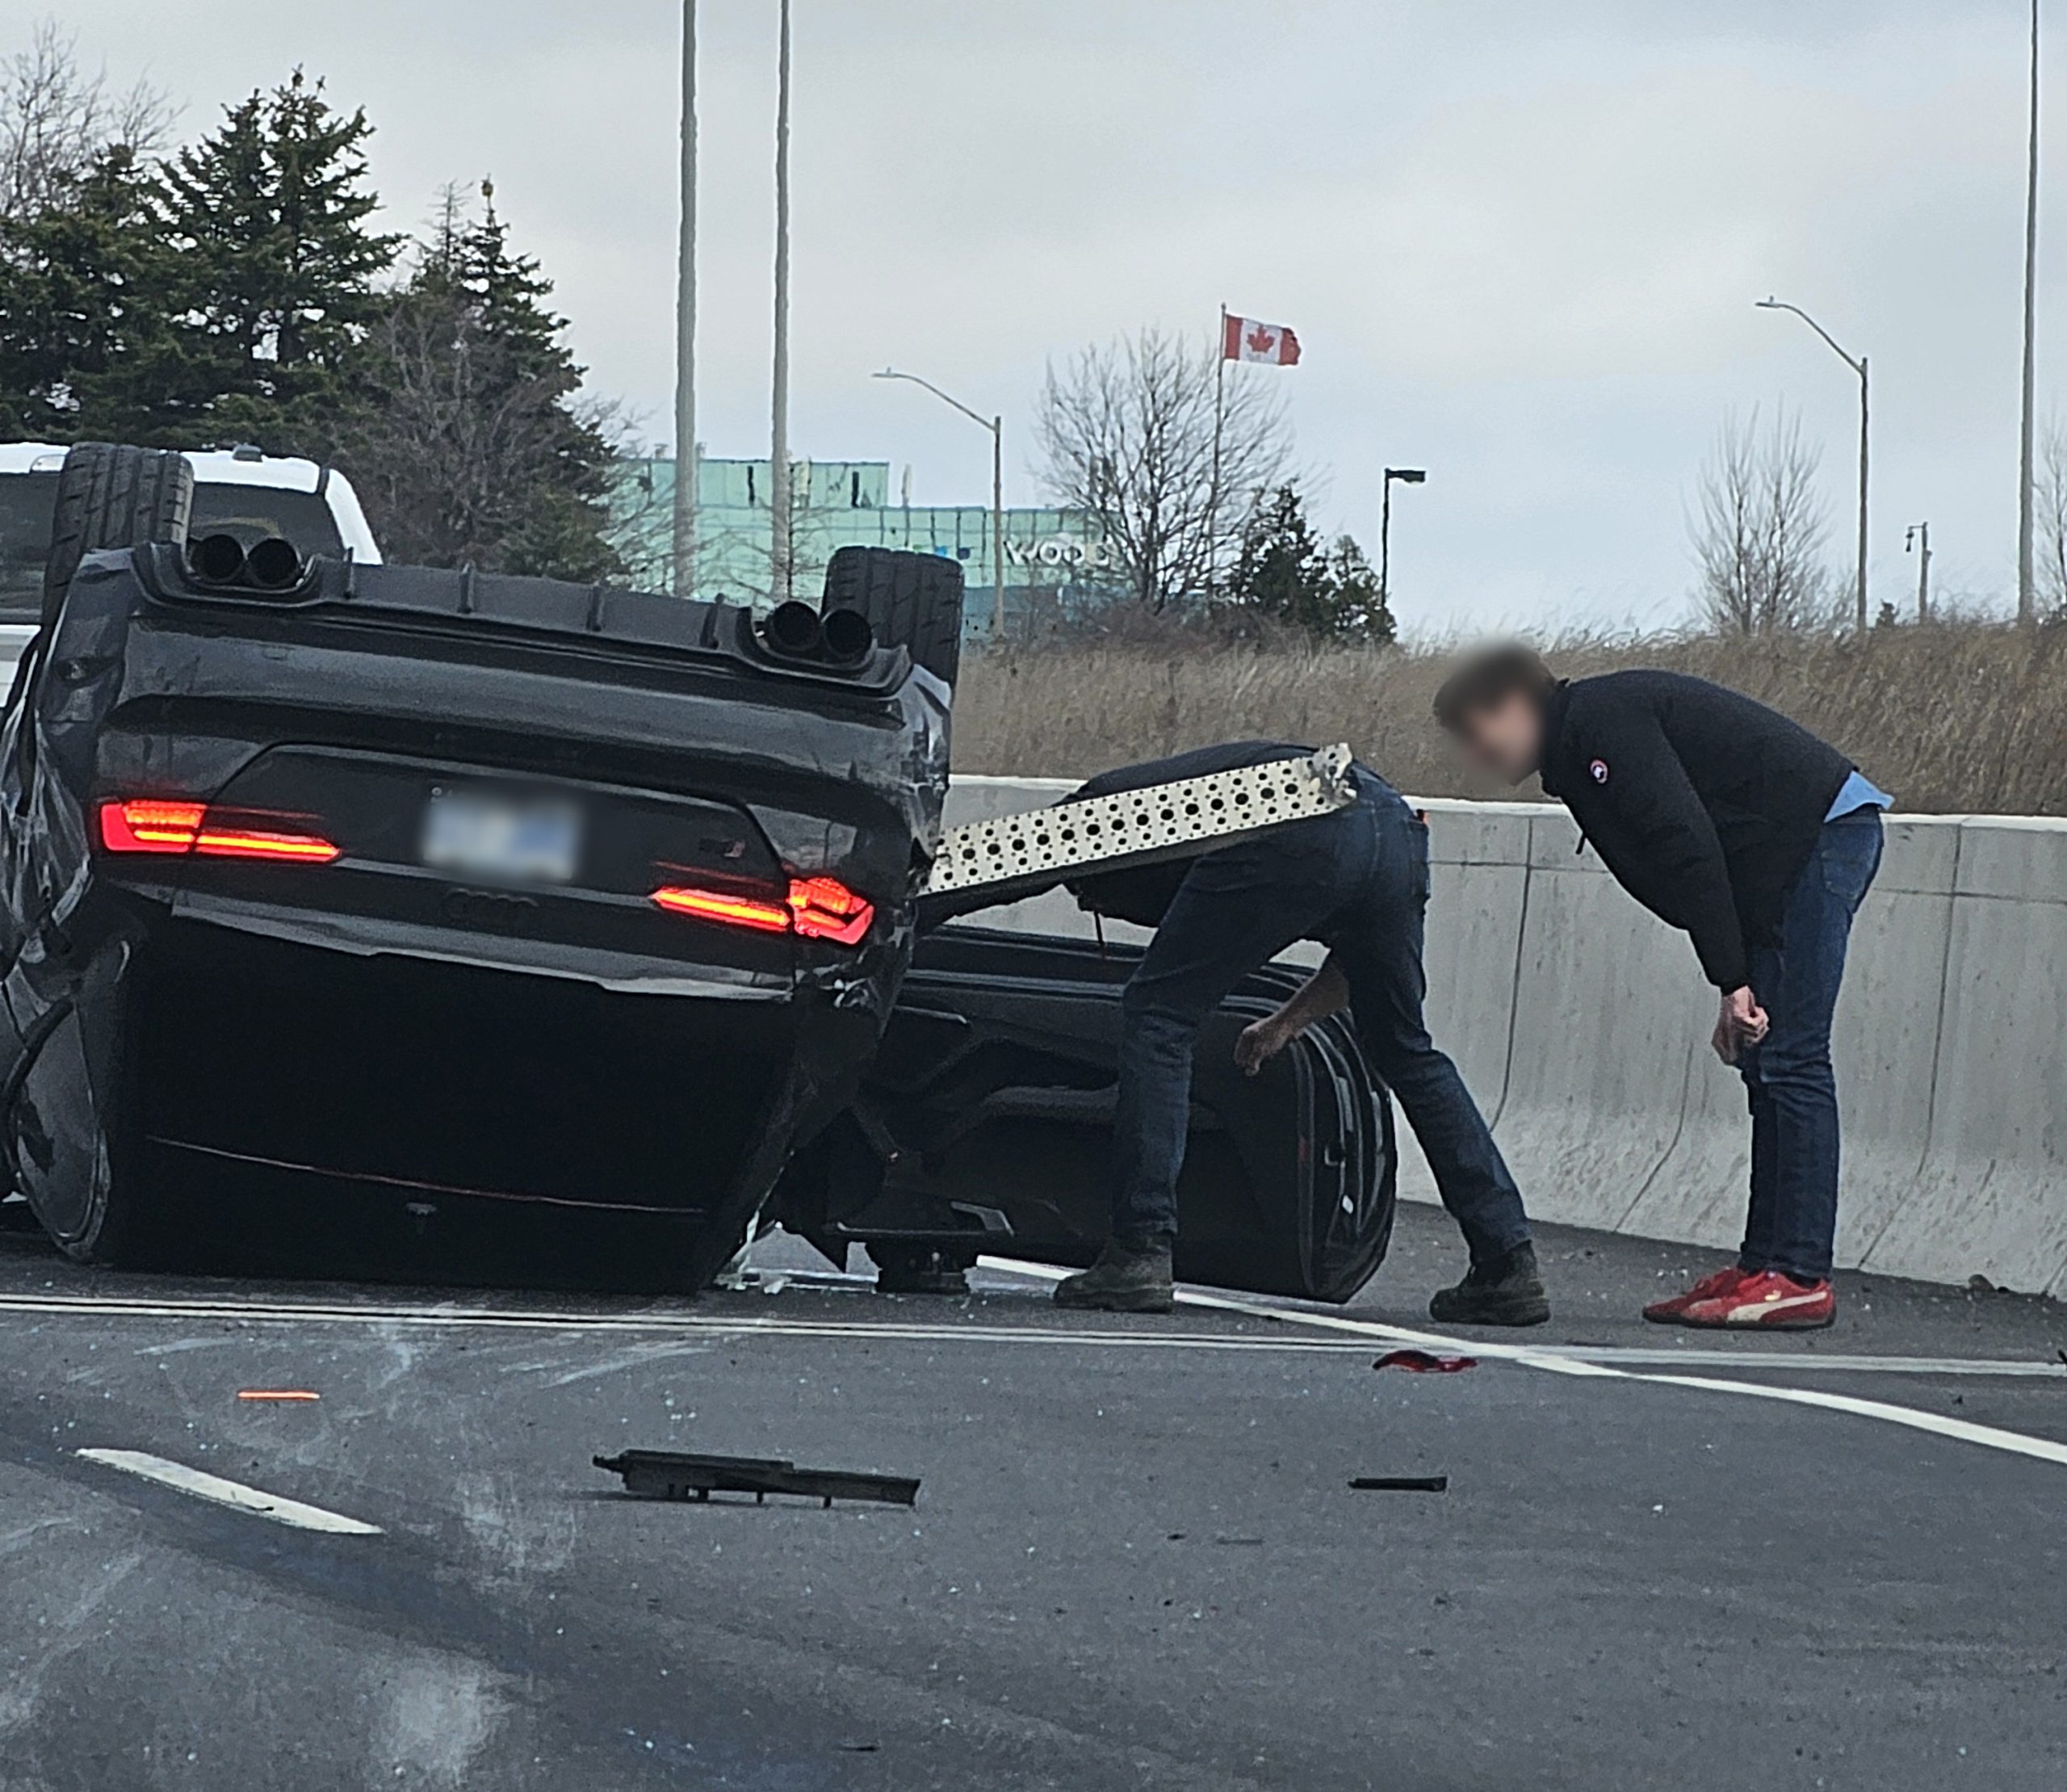 2 people trying to help the driver/people inside. Overturned black Audi car on ON-403 highway in Oakville after a severe accident